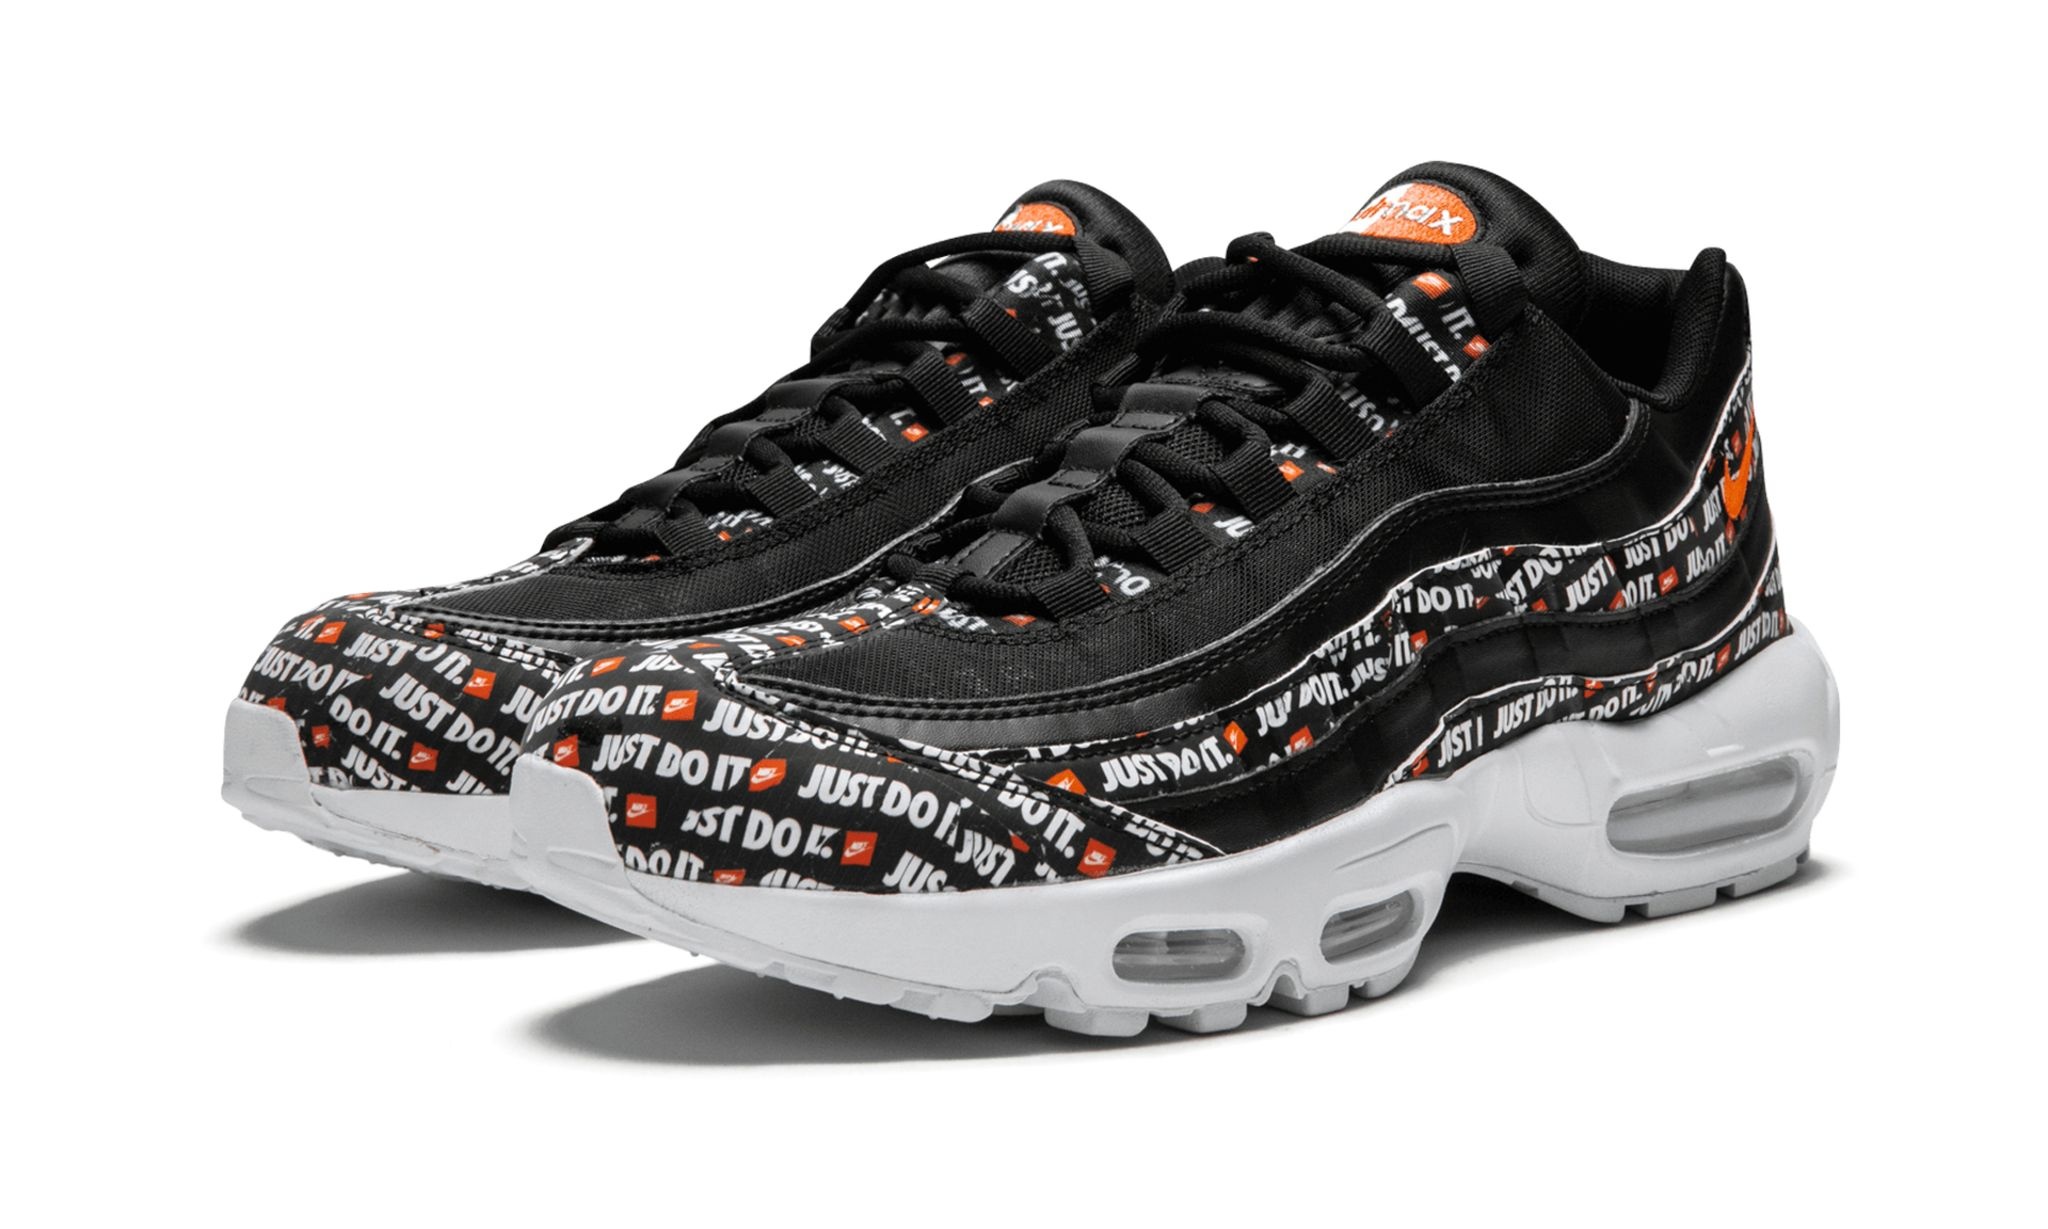 Air Max 95 SE "Just Do It Pack" - 2